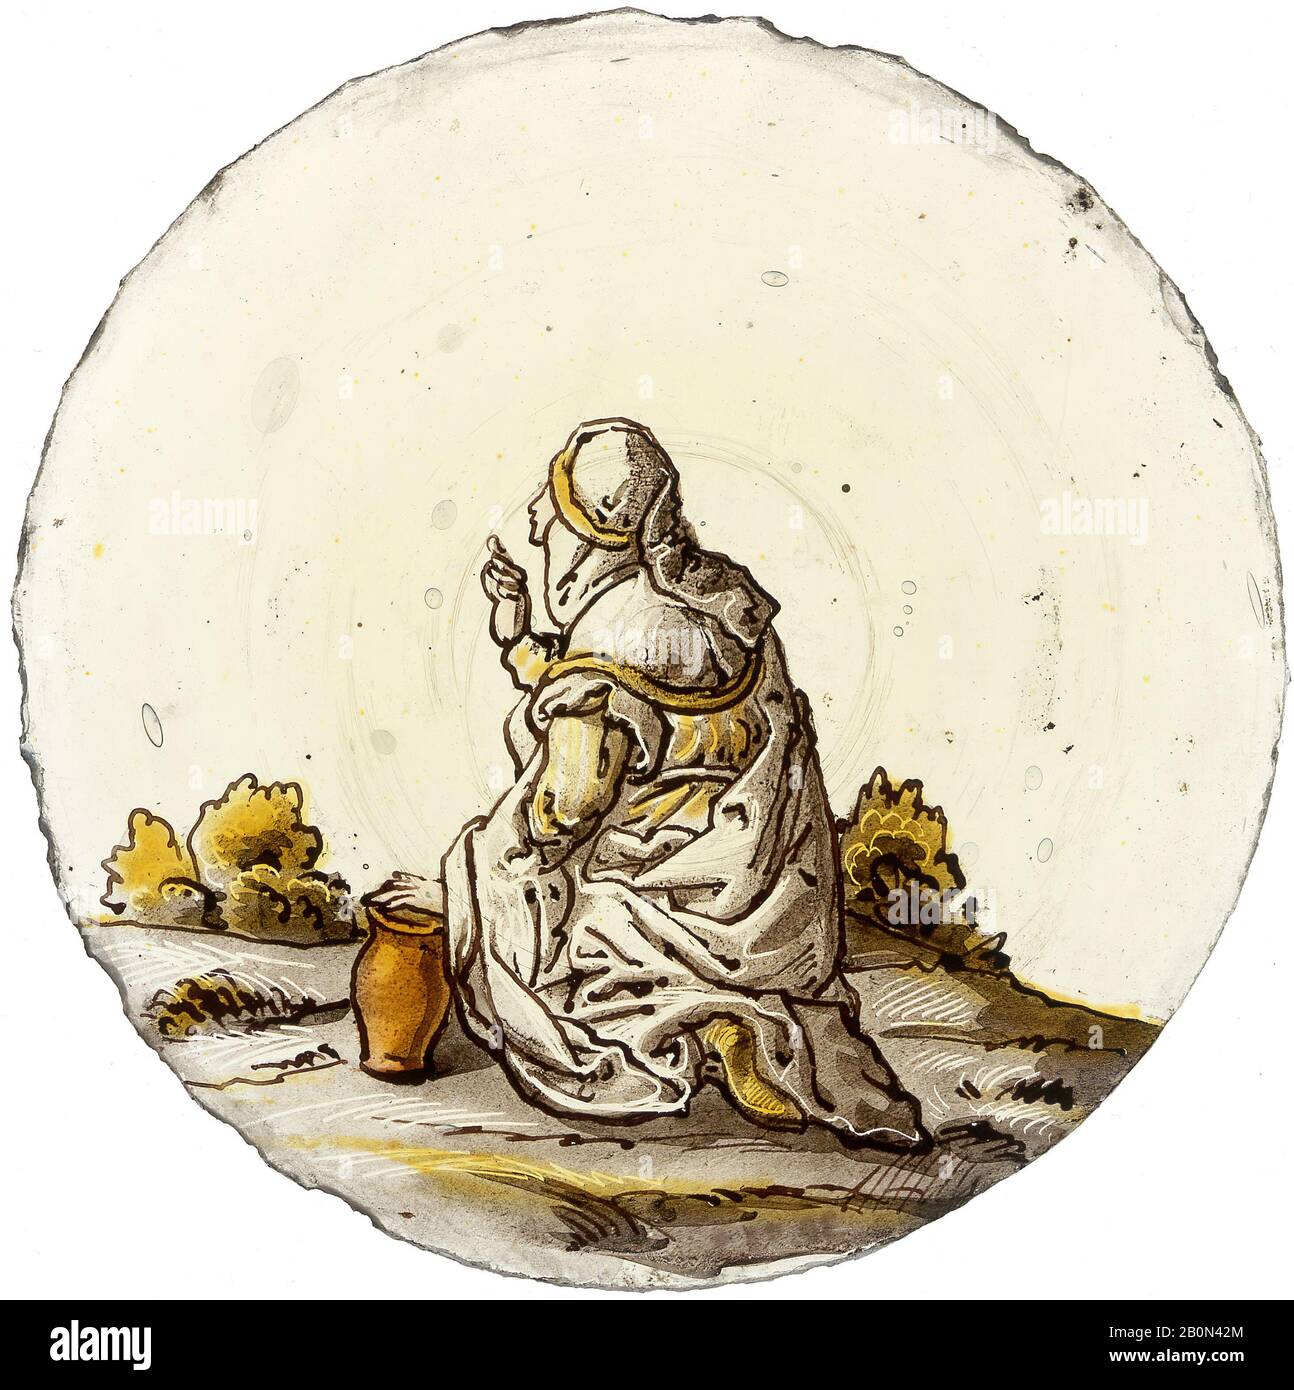 Saint Mary Magdalene, possibly Dutch, 17th–18th century, possibly Dutch, Colorless glass, silver stain, and vitreous paint, Diameter: 5 in. (12.7 cm), Glass-Stained Stock Photo